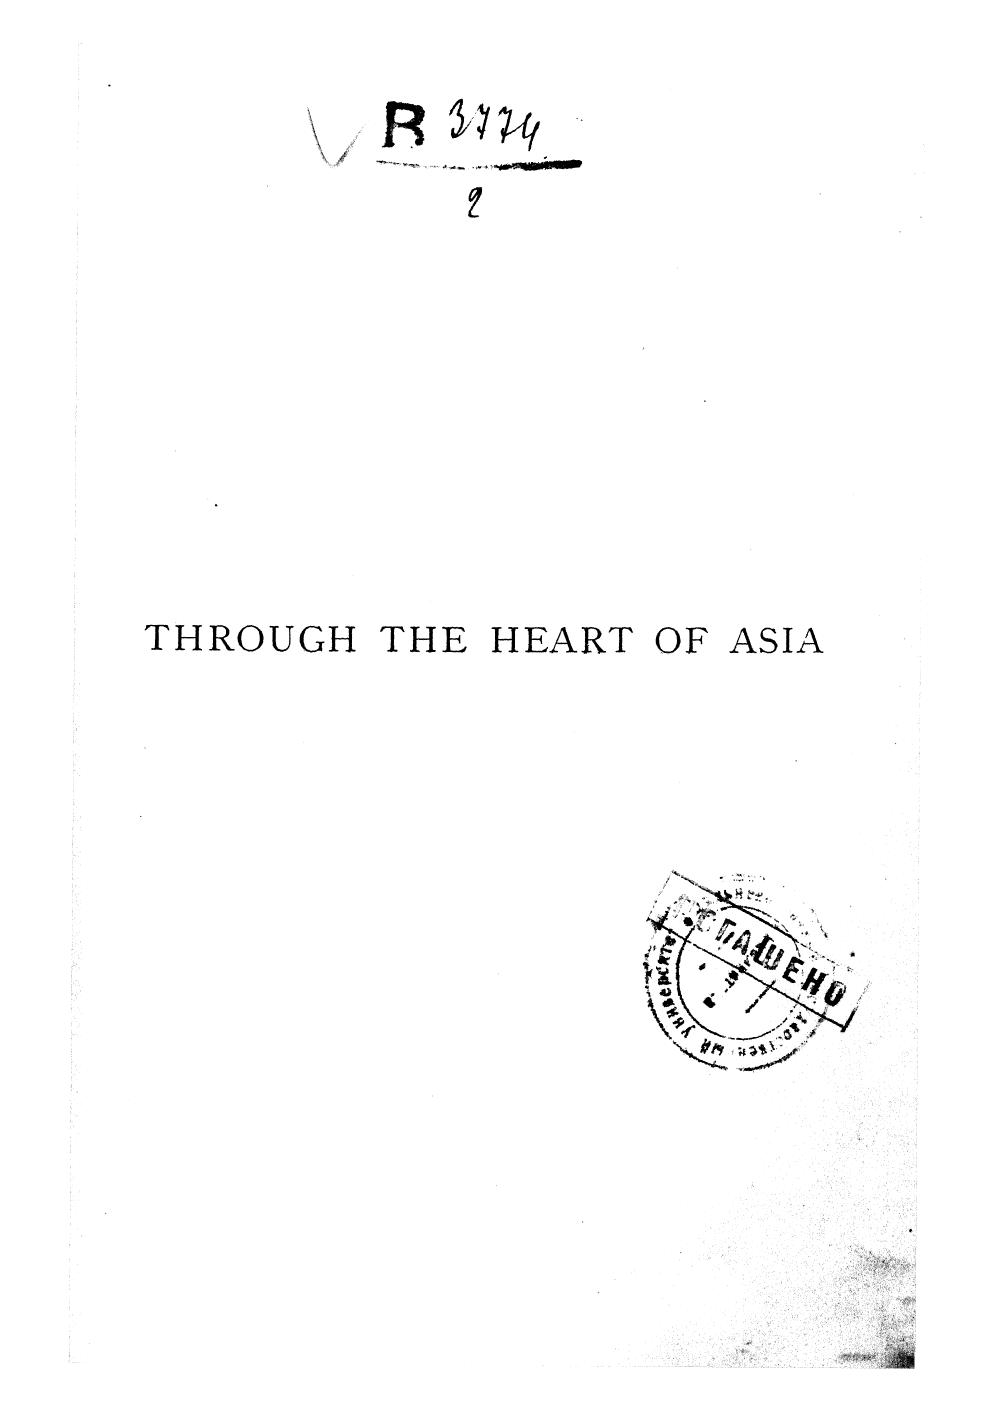 BY Gabriel Bonvalot, WITH 250 Illustrations BY Albert Pepin - Through the heart of asia  . vol. 2 by 1889